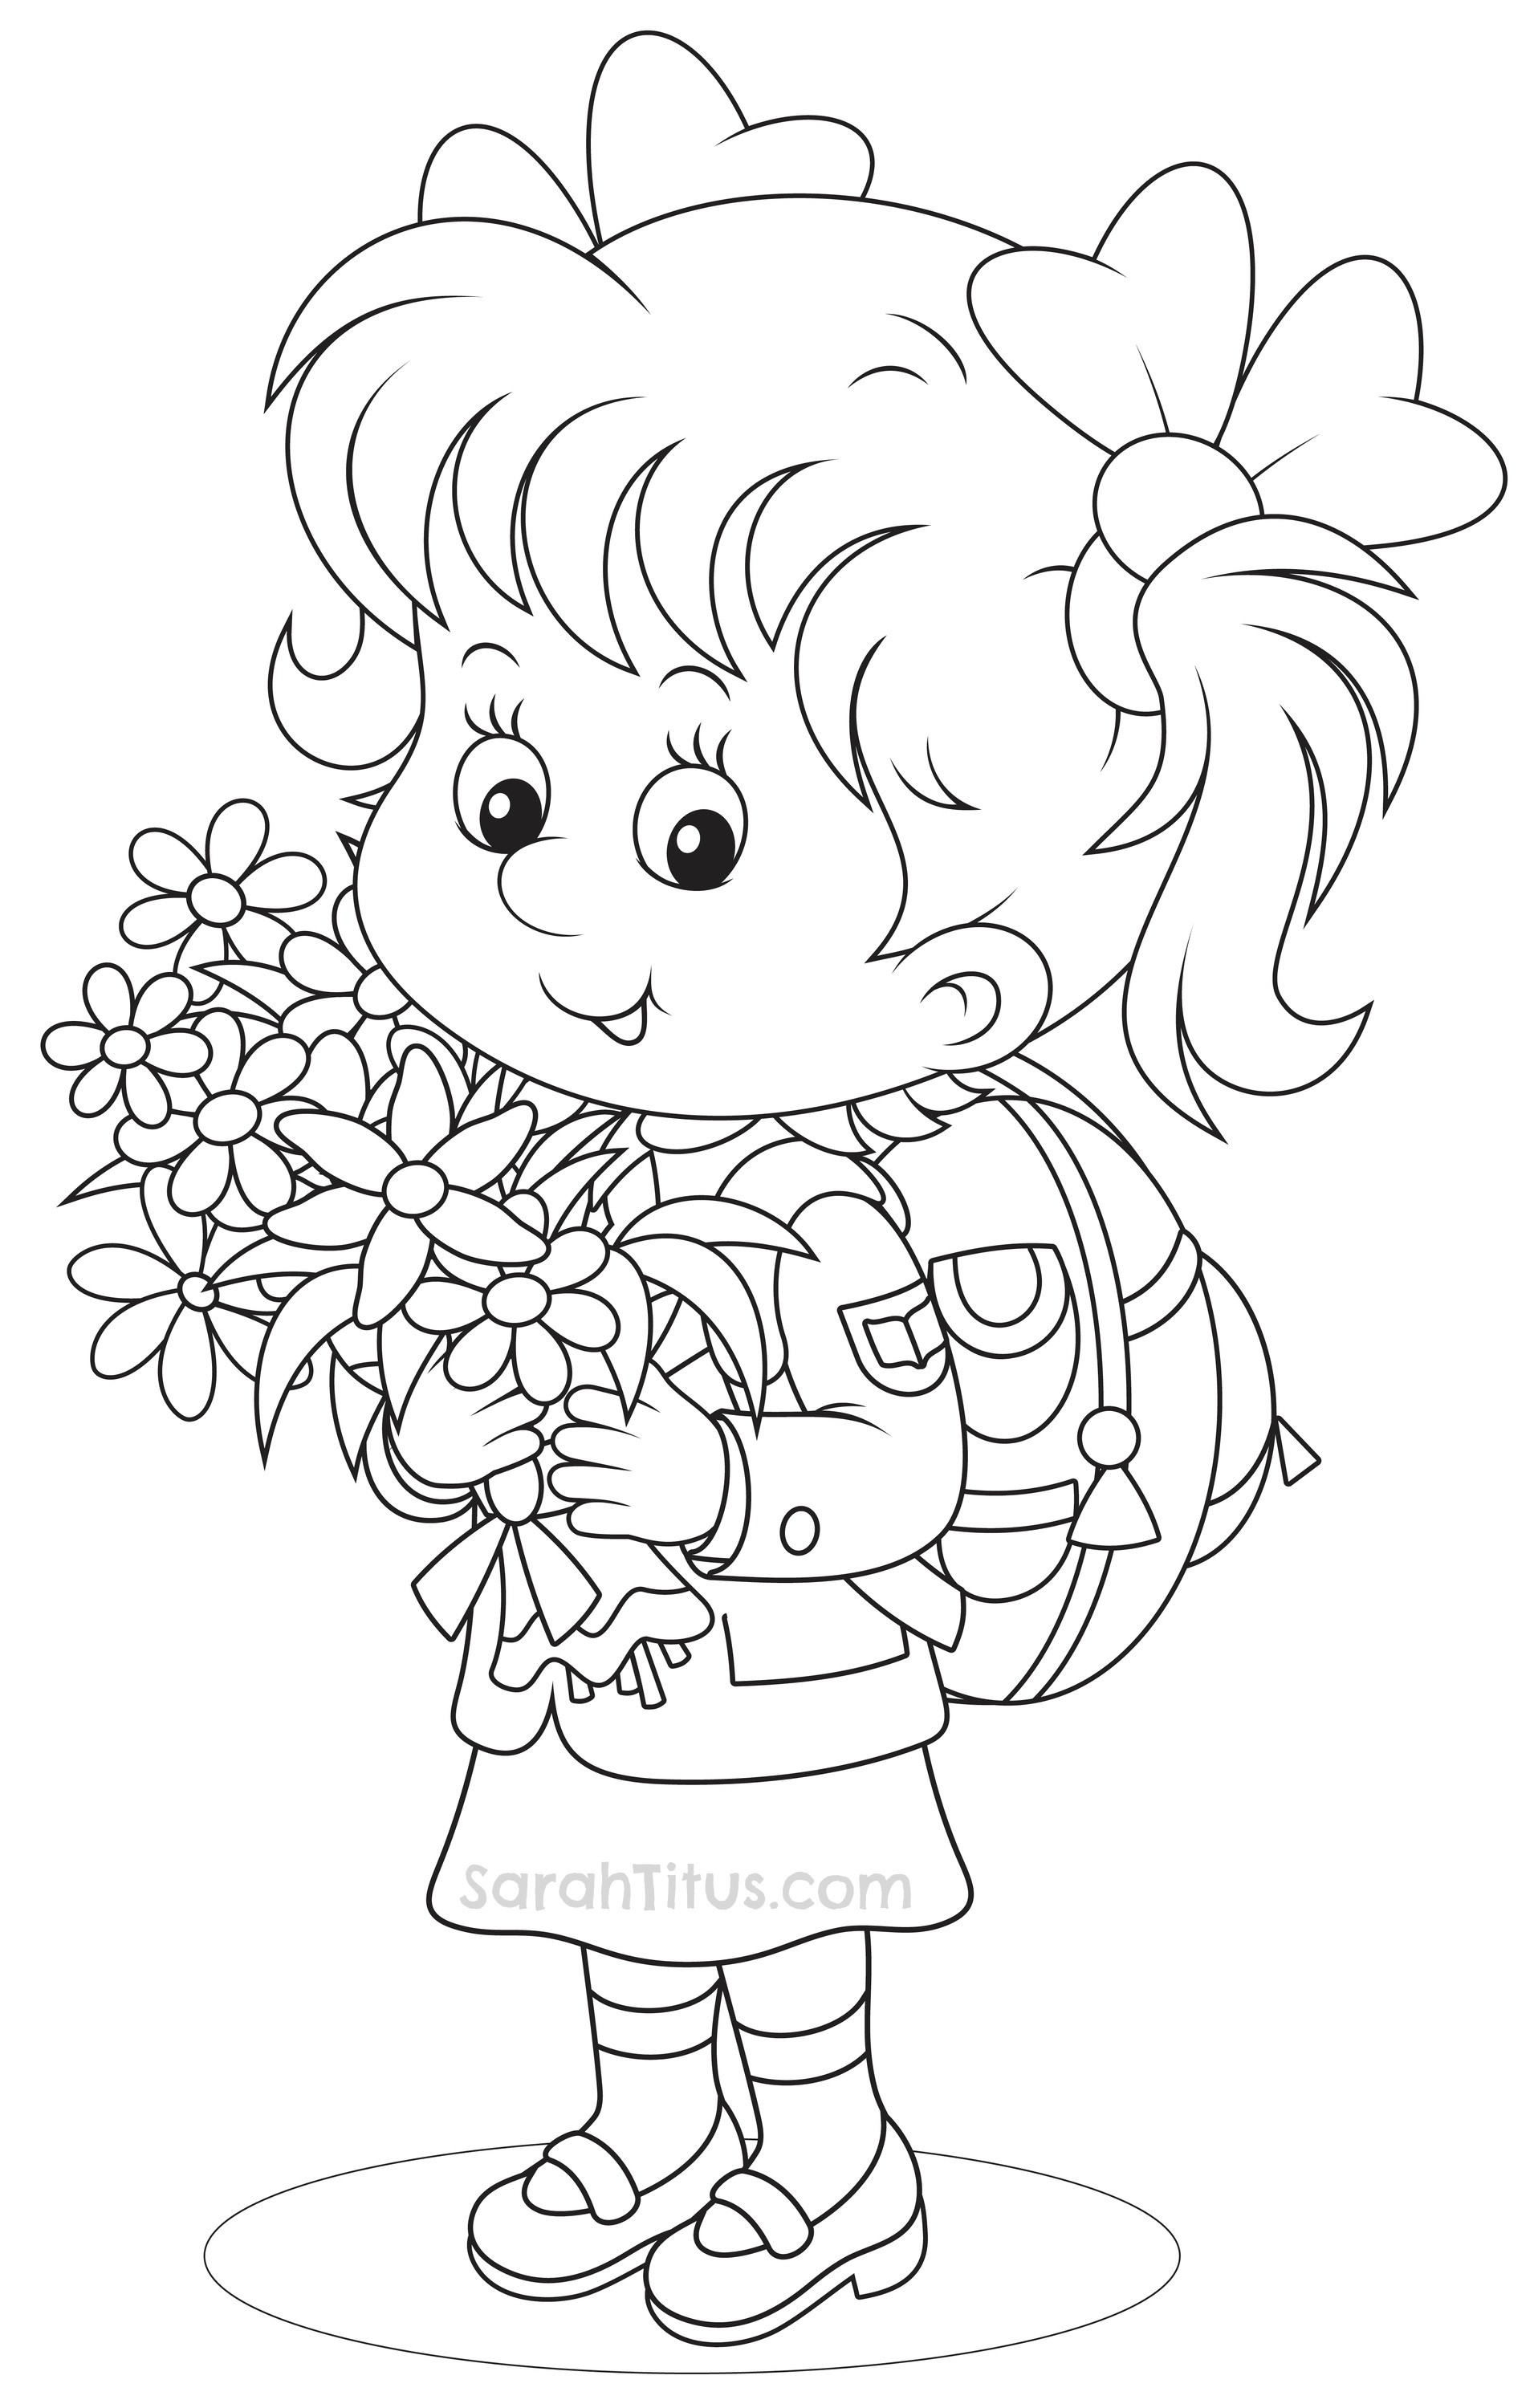 Back To School Coloring Page
 Back to School Coloring Pages Sarah Titus